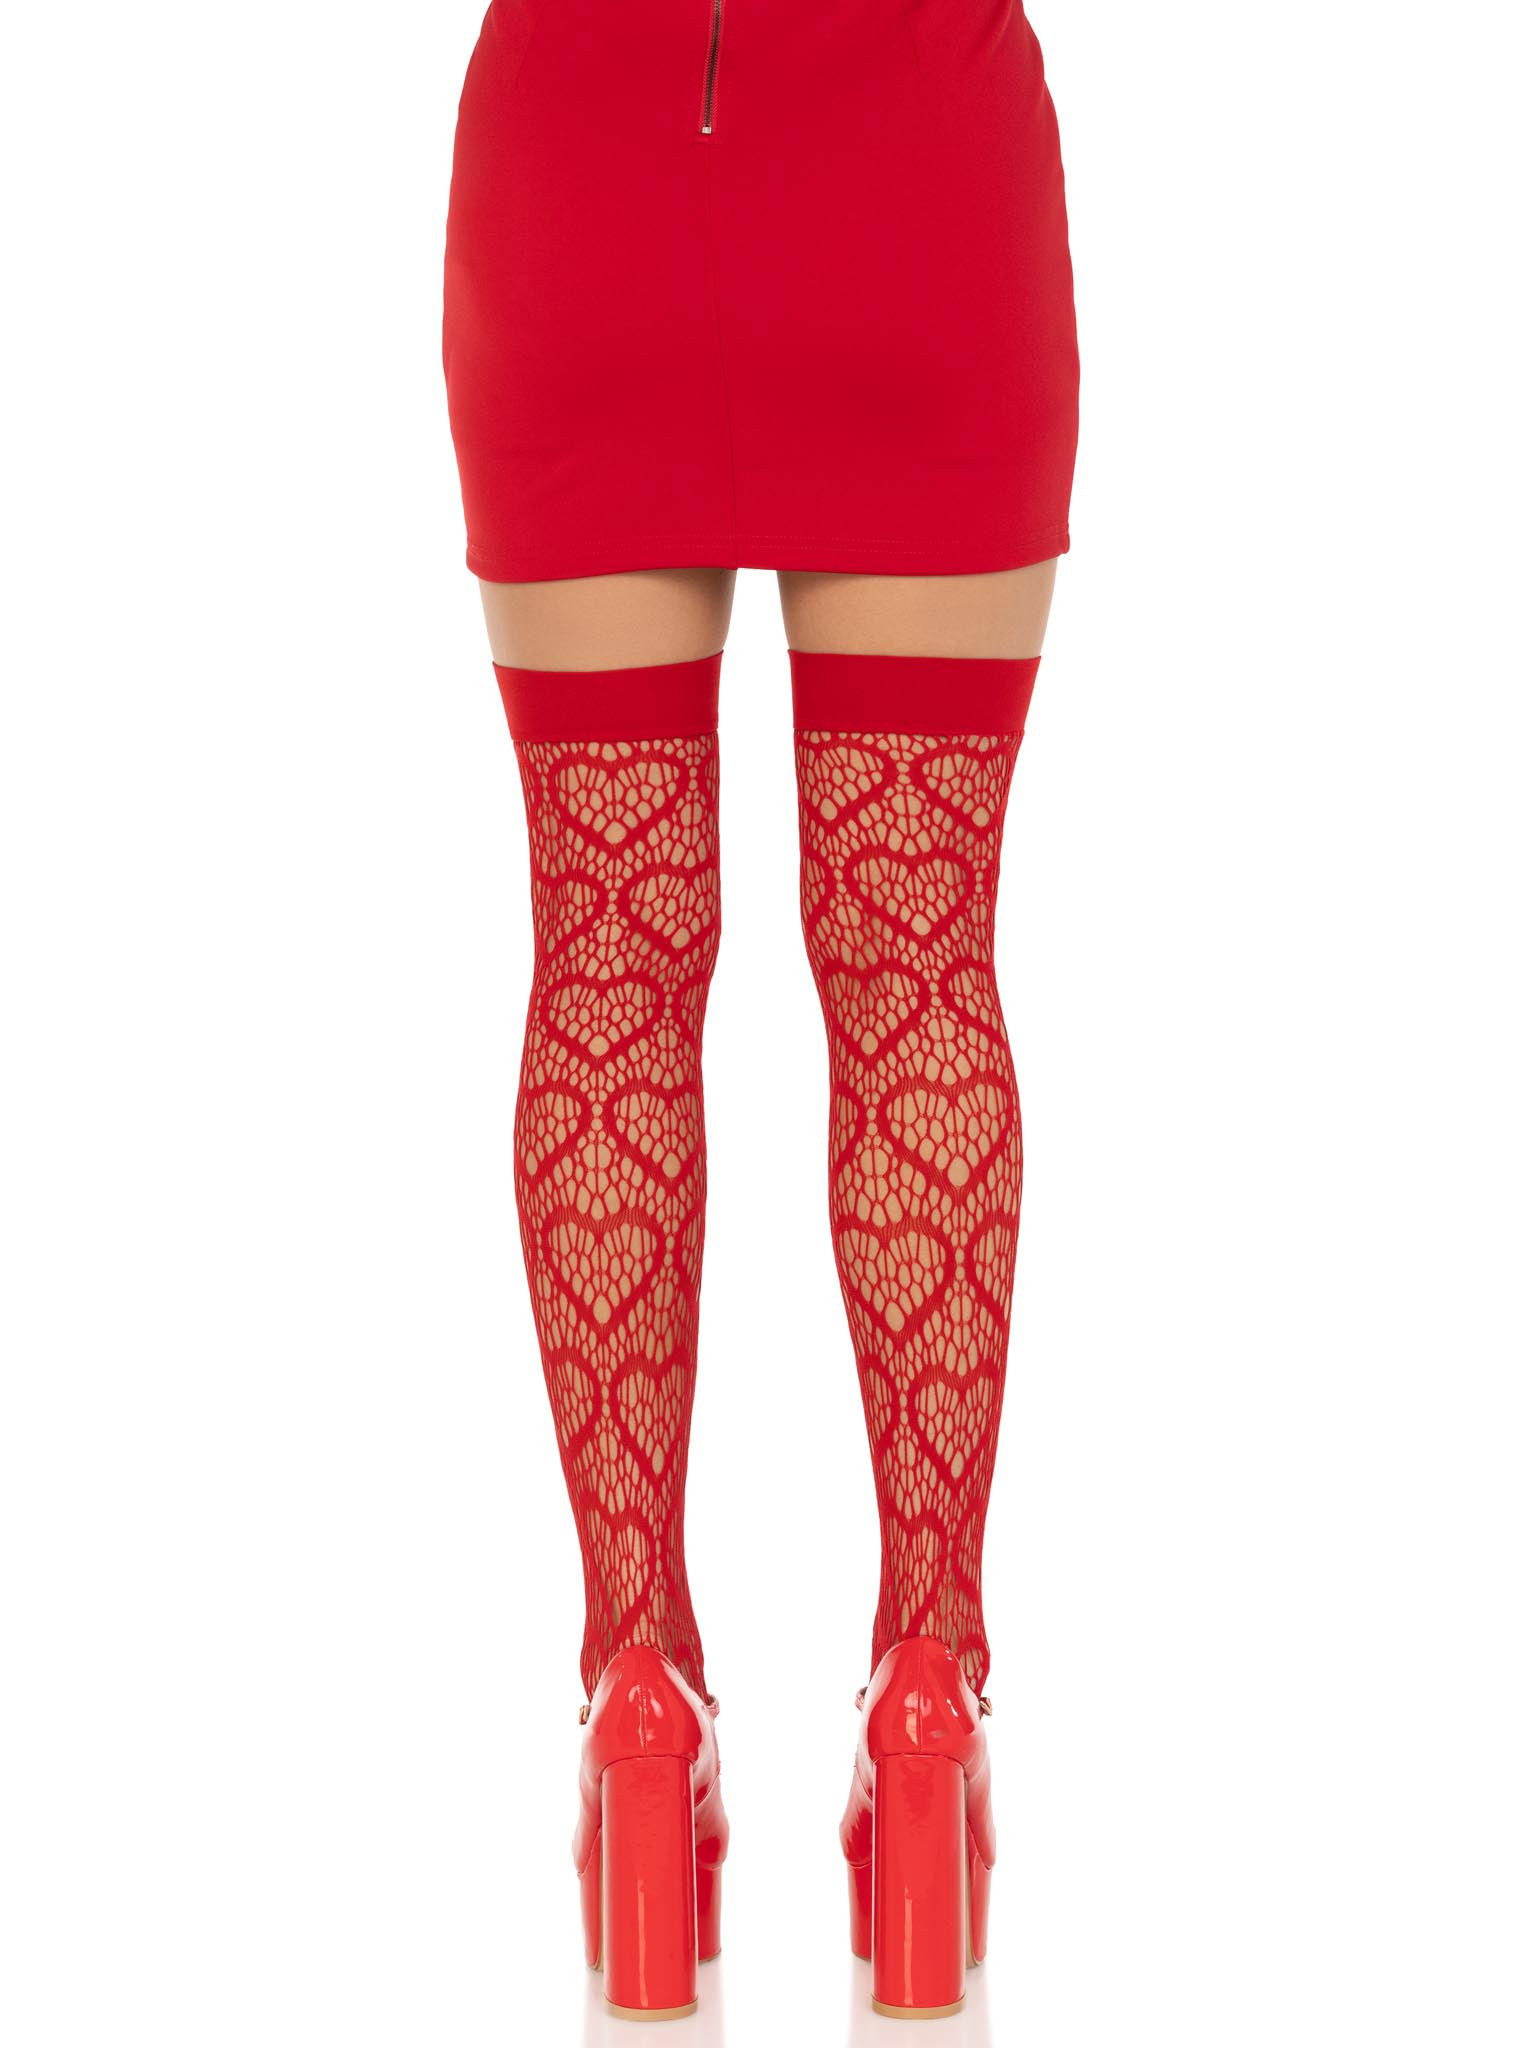 Heart Net Thigh Highs - One Size - Red-0